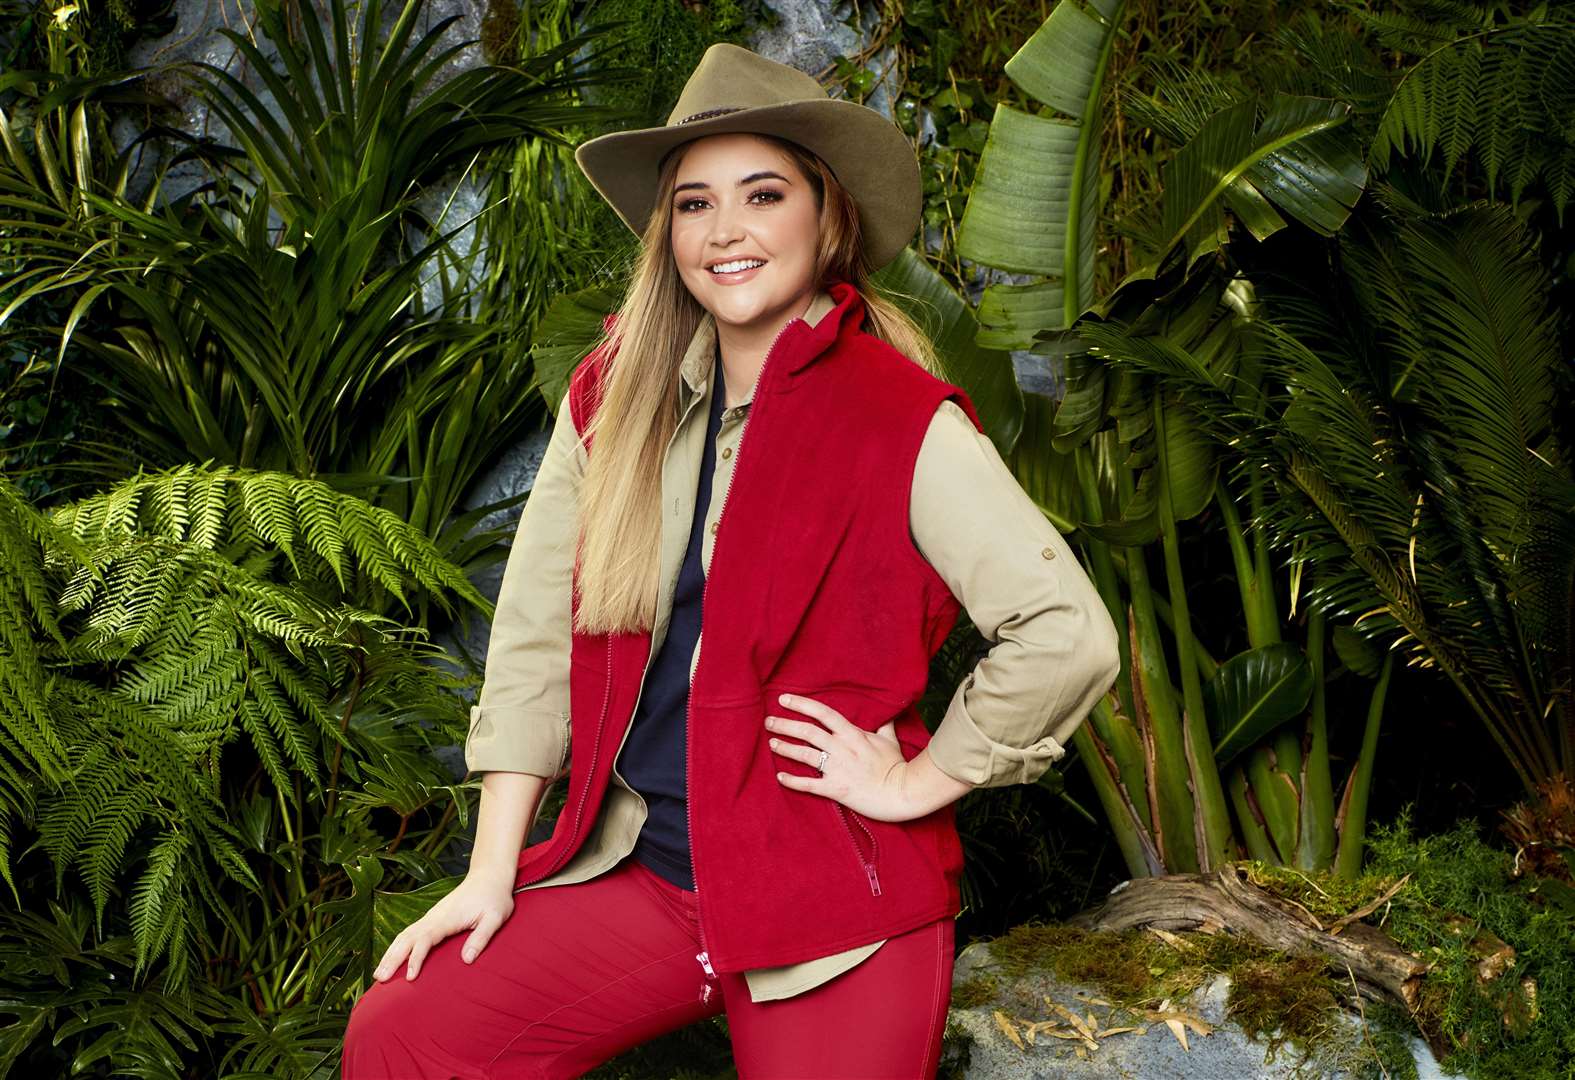 Jacqueline Jossa has made it to the final of I'm A Celeb. Picture: ITV